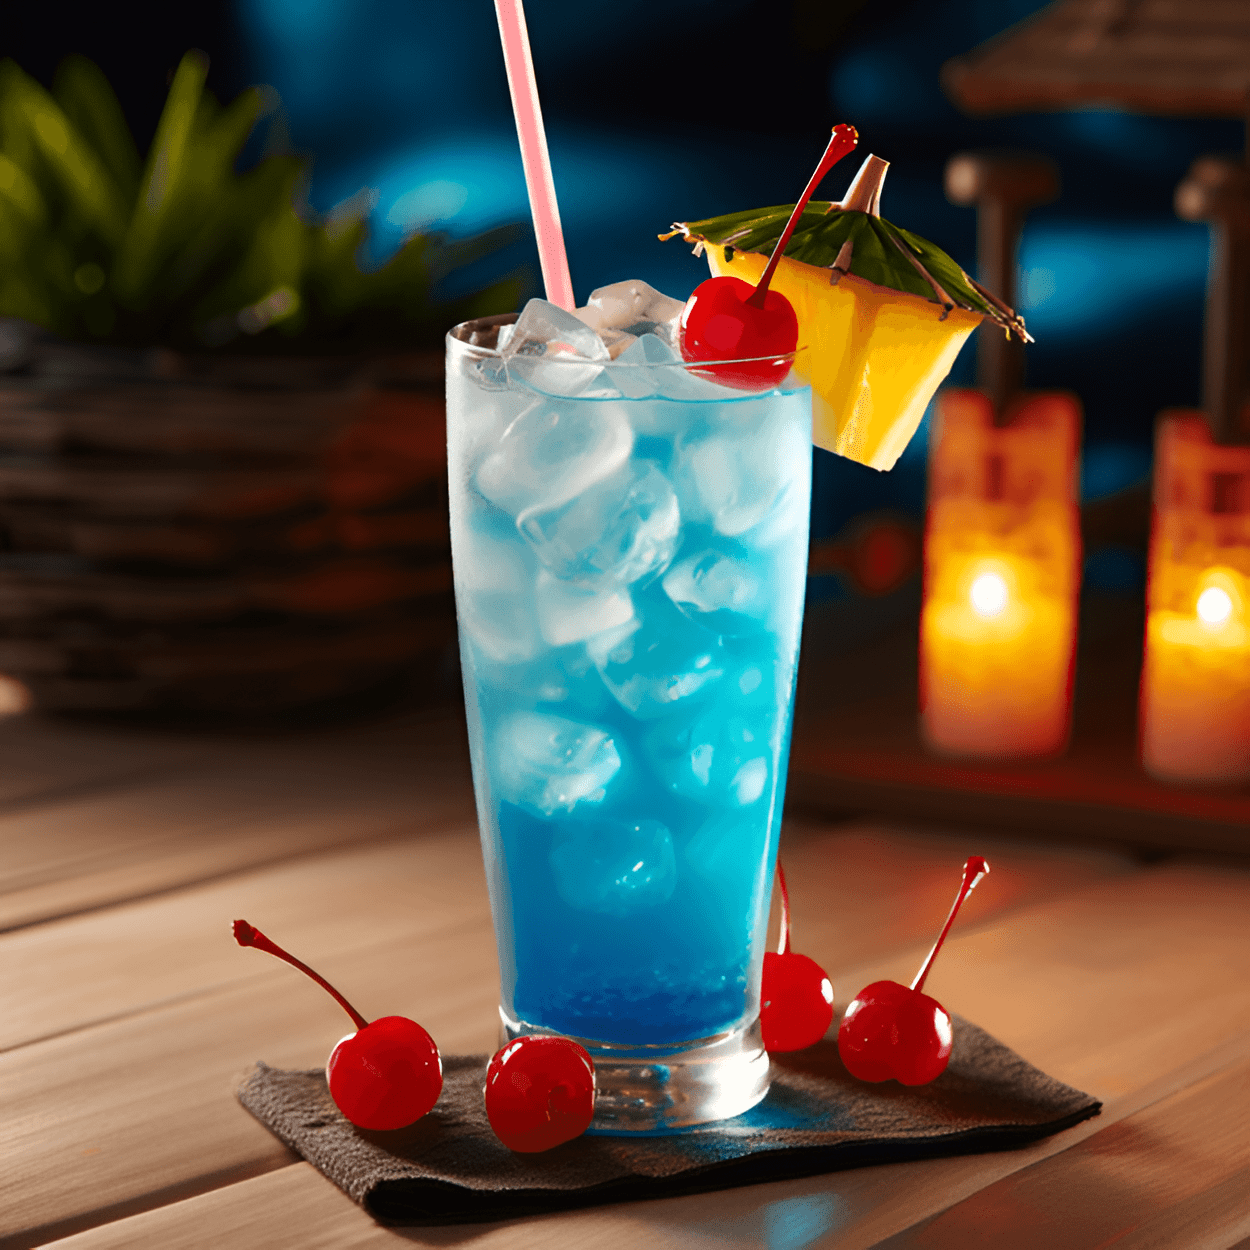 Lake Water Cocktail Recipe - The Lake Water cocktail is a delightful blend of sweet and sour. The coconut rum adds a tropical sweetness, while the blue curacao lends a slightly bitter citrus flavor. The pineapple juice and lemon-lime soda balance out the flavors with a tangy freshness.